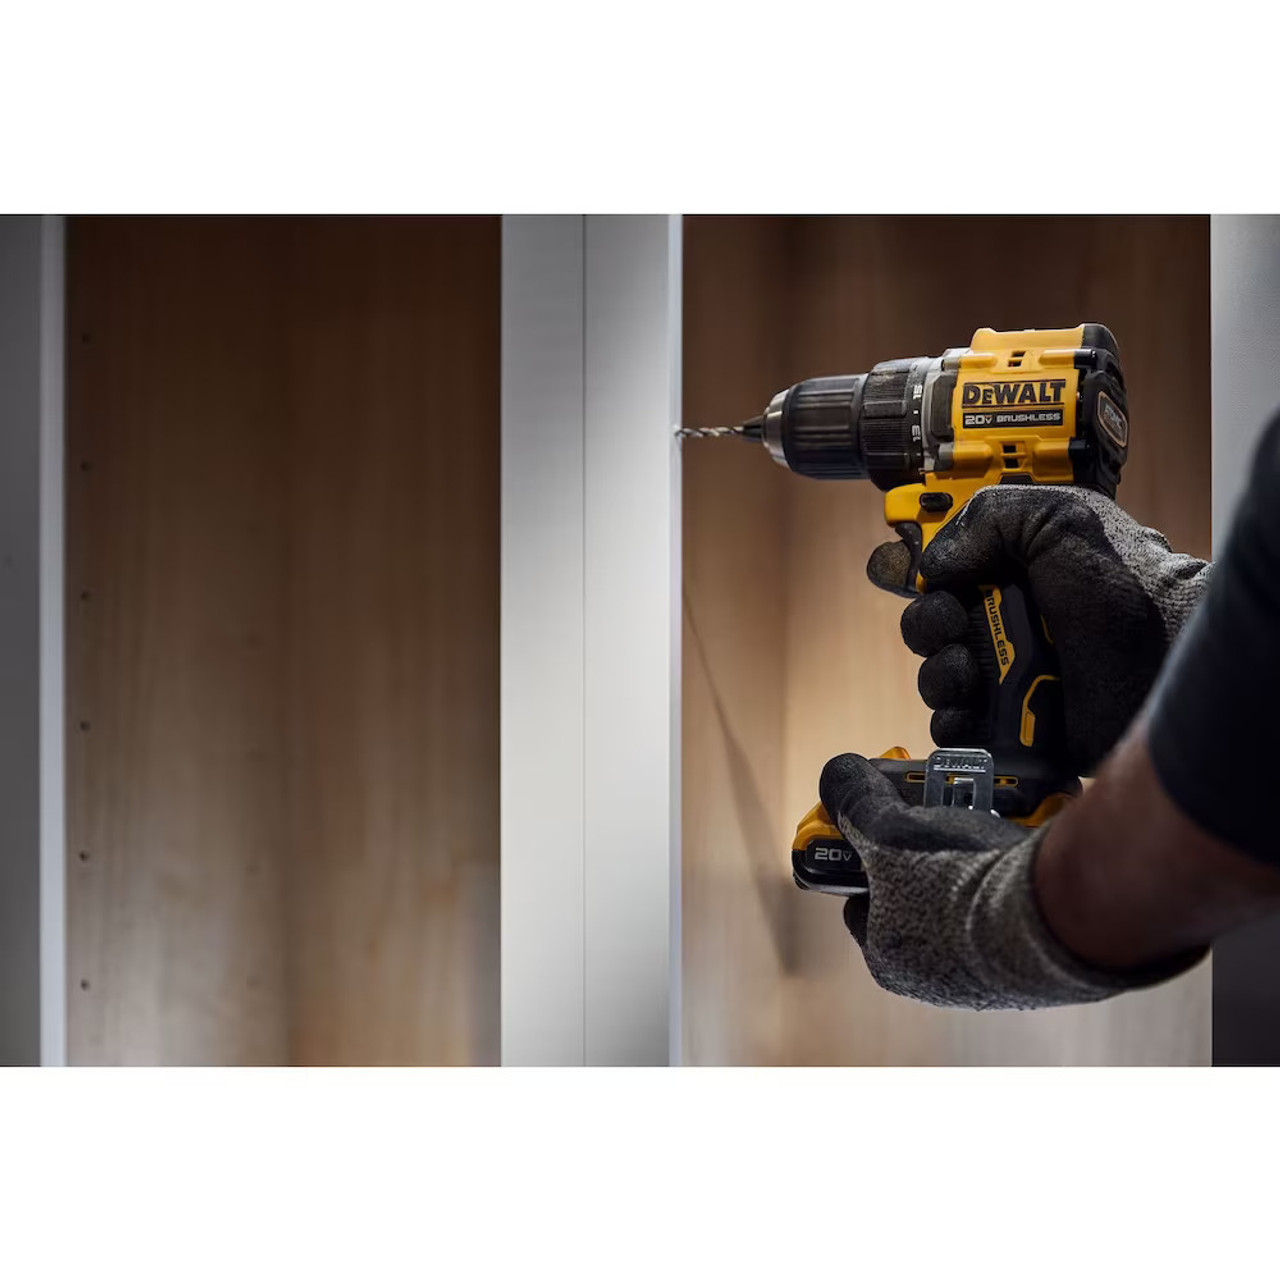 COMPACT DRILL DRIVER AND COMPACT IMPACT DRIVER COMBO KIT